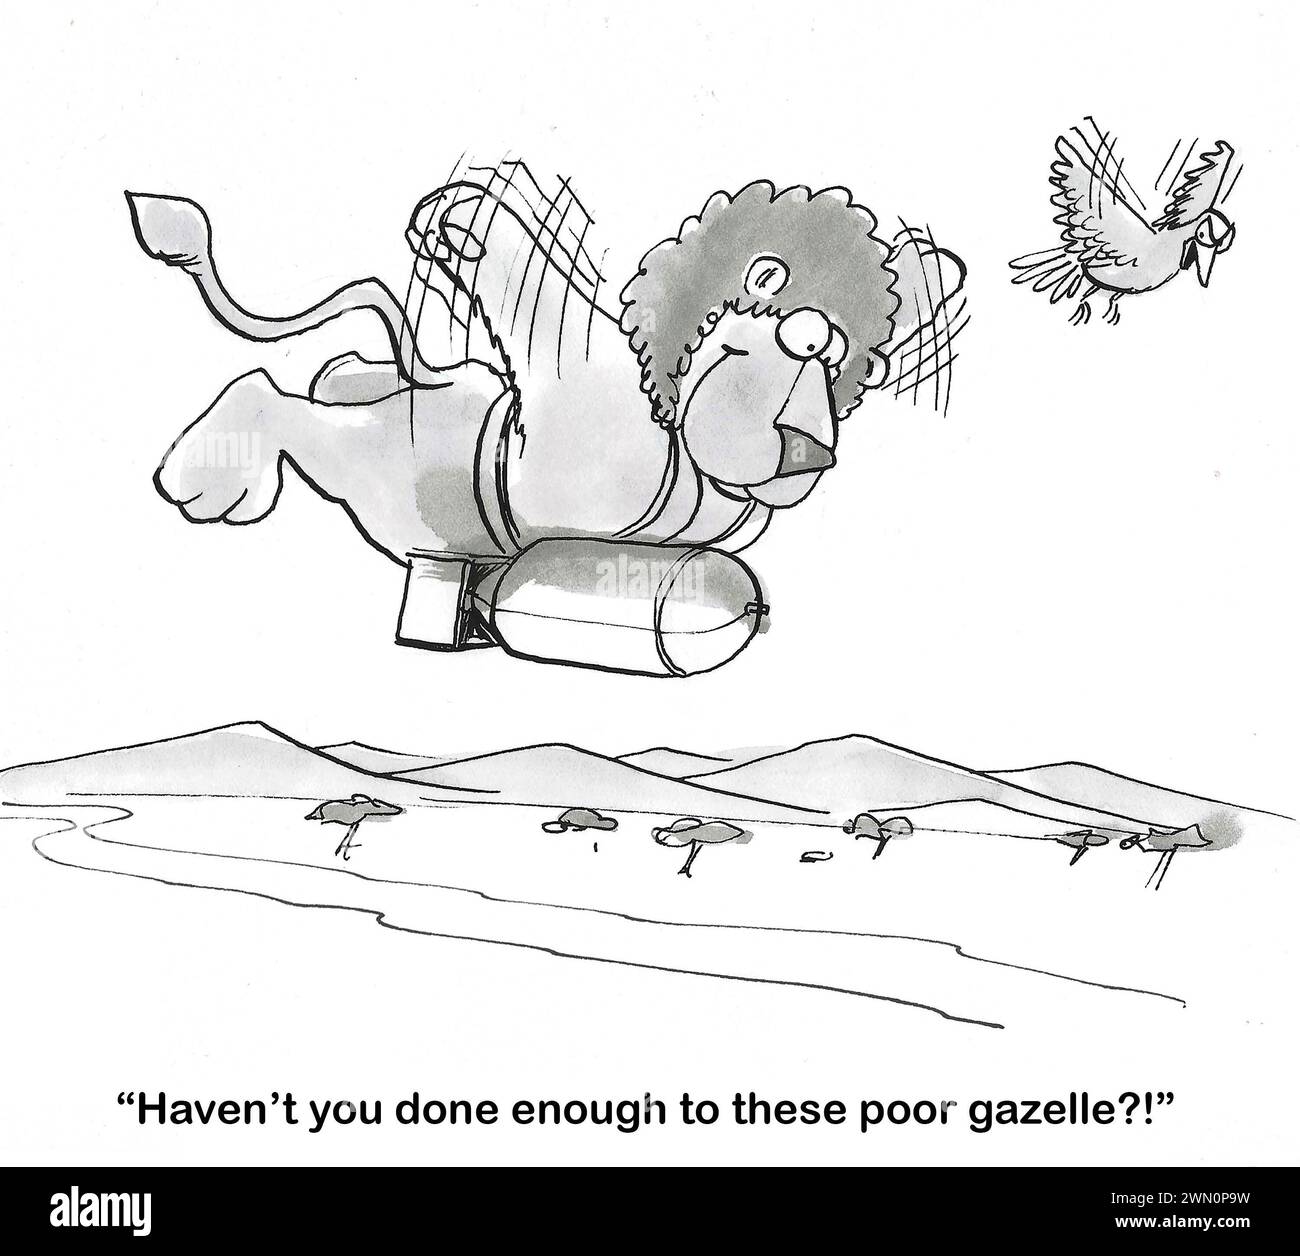 BW cartoon of a flying lion about to bomb a 'poor gazelle'. Stock Photo